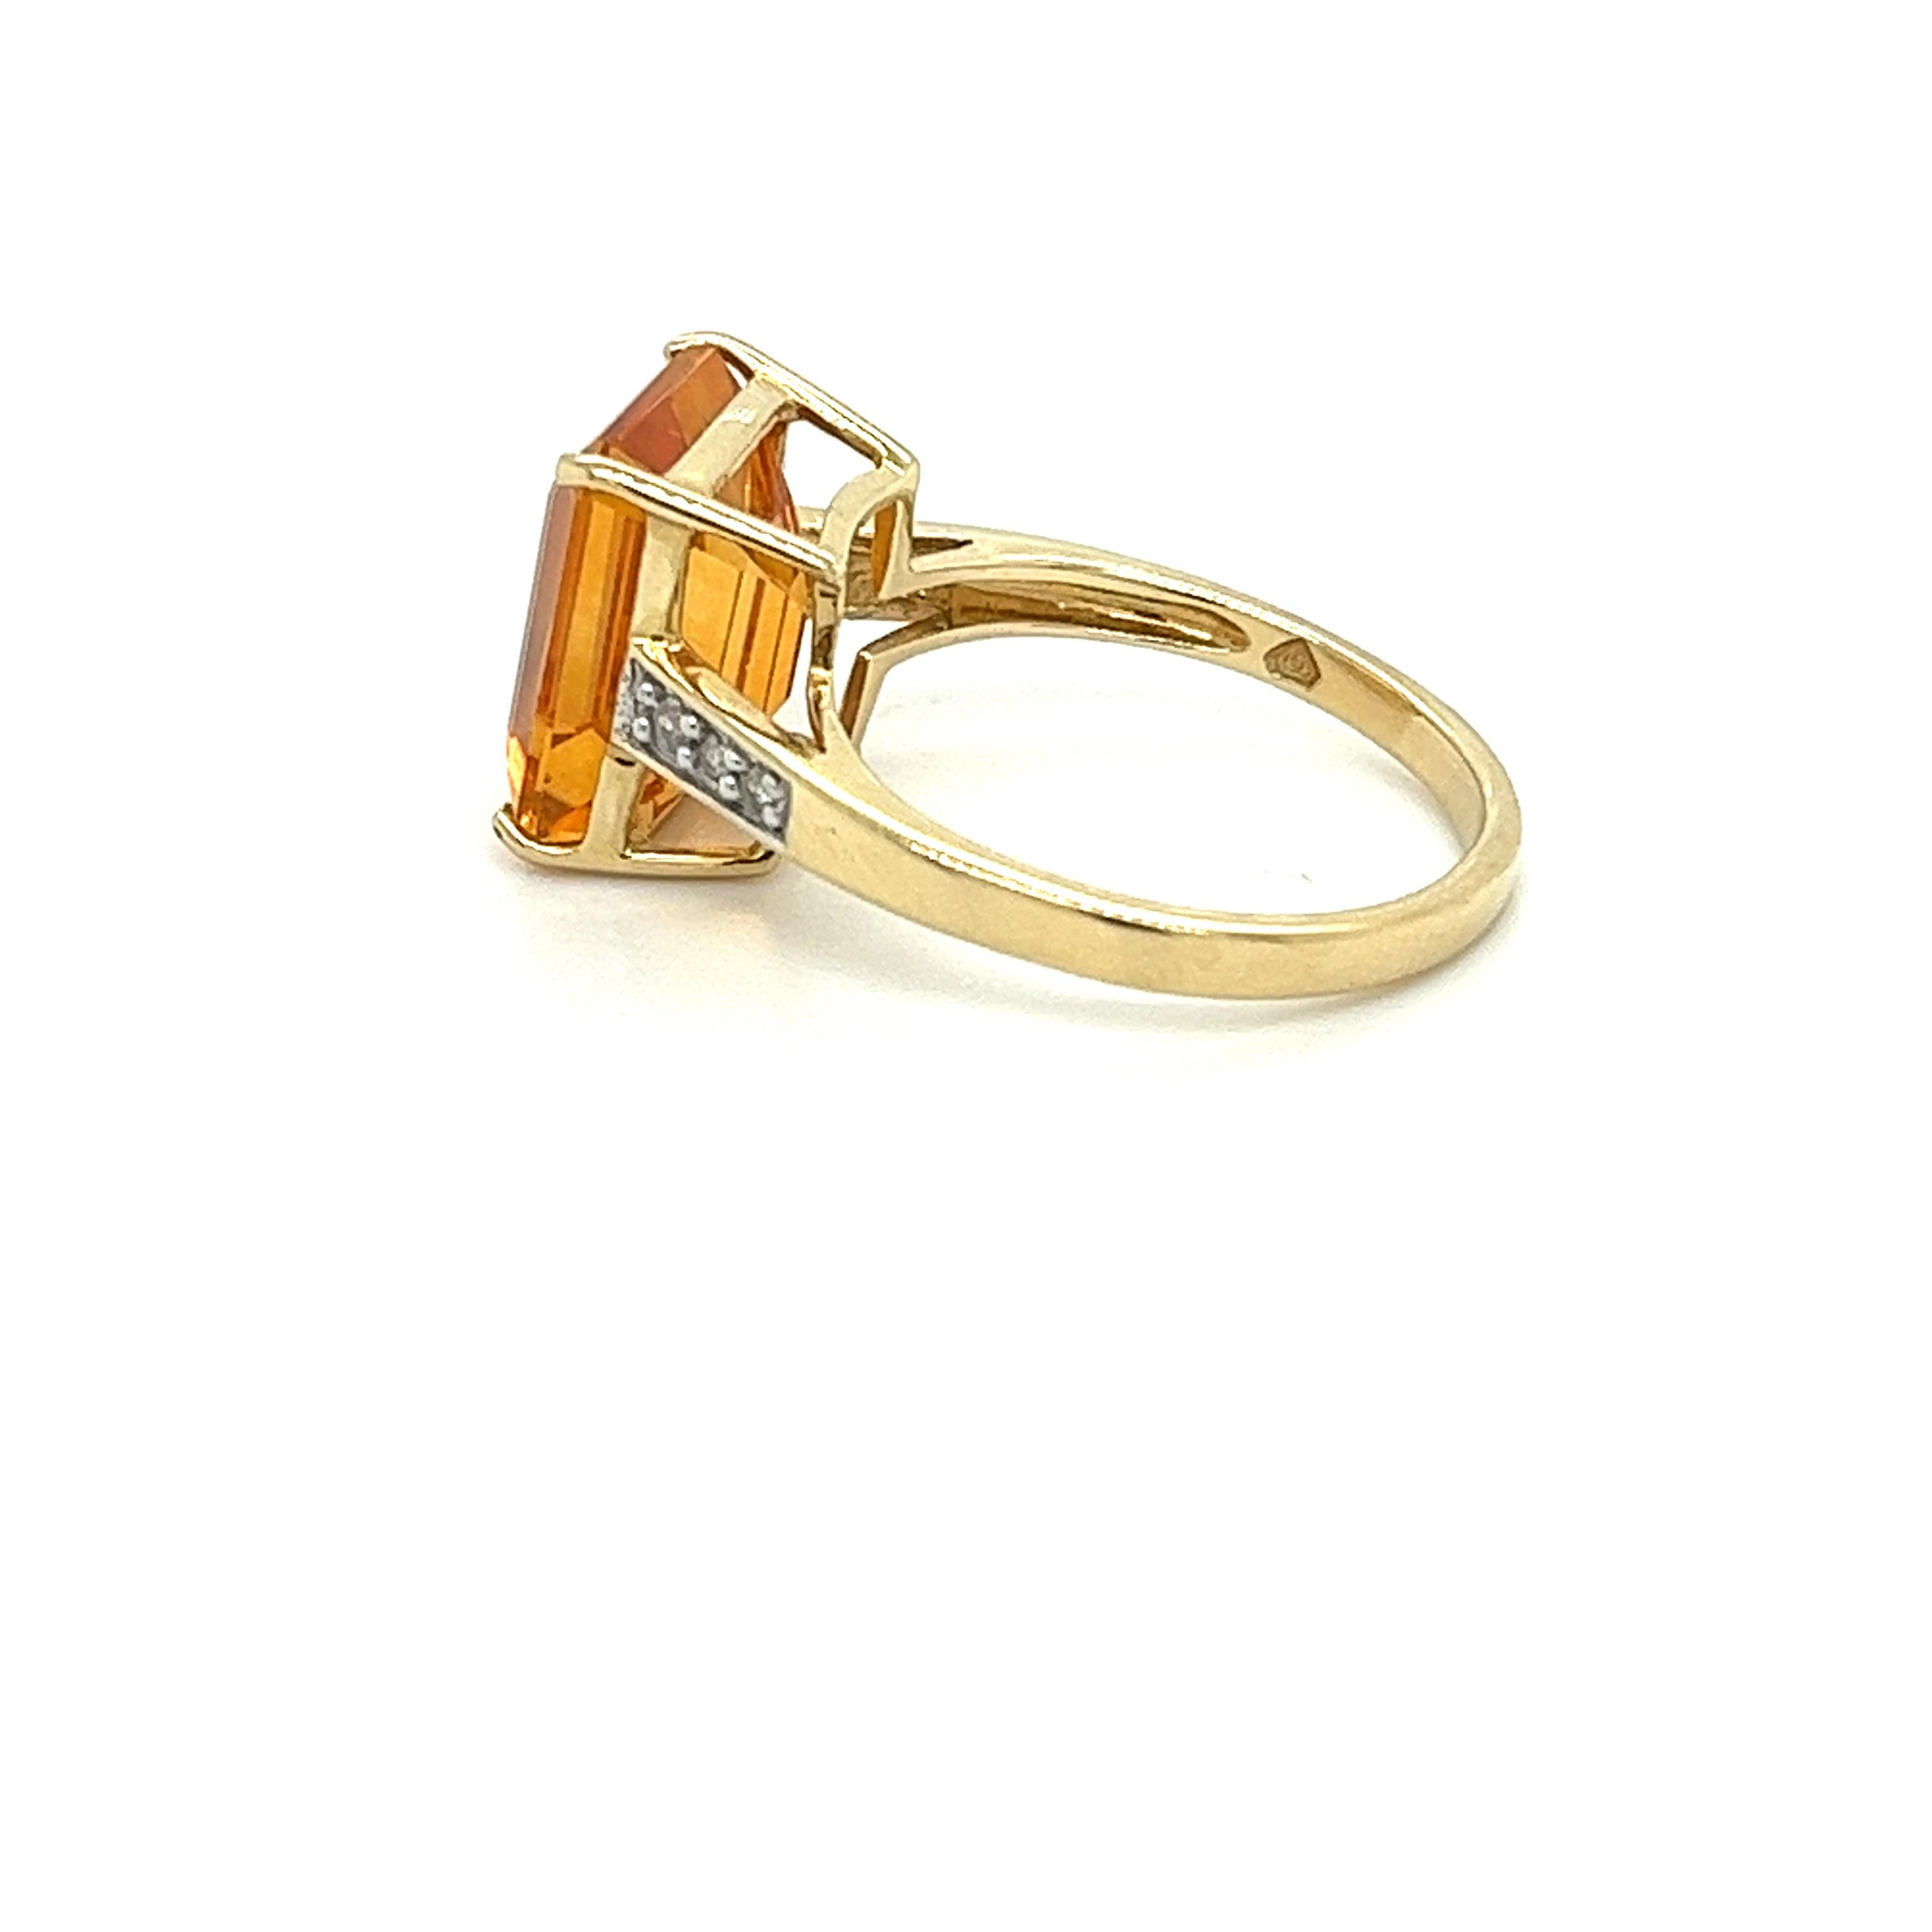 7-carat emerald cut natural Citrine in a 4-prong cathedral ring setting. Mounted with round brilliant cut natural diamonds side stones. The citrine center stone is vibrant, clean, and full of life. Well contrasted by the white gold that mounts the